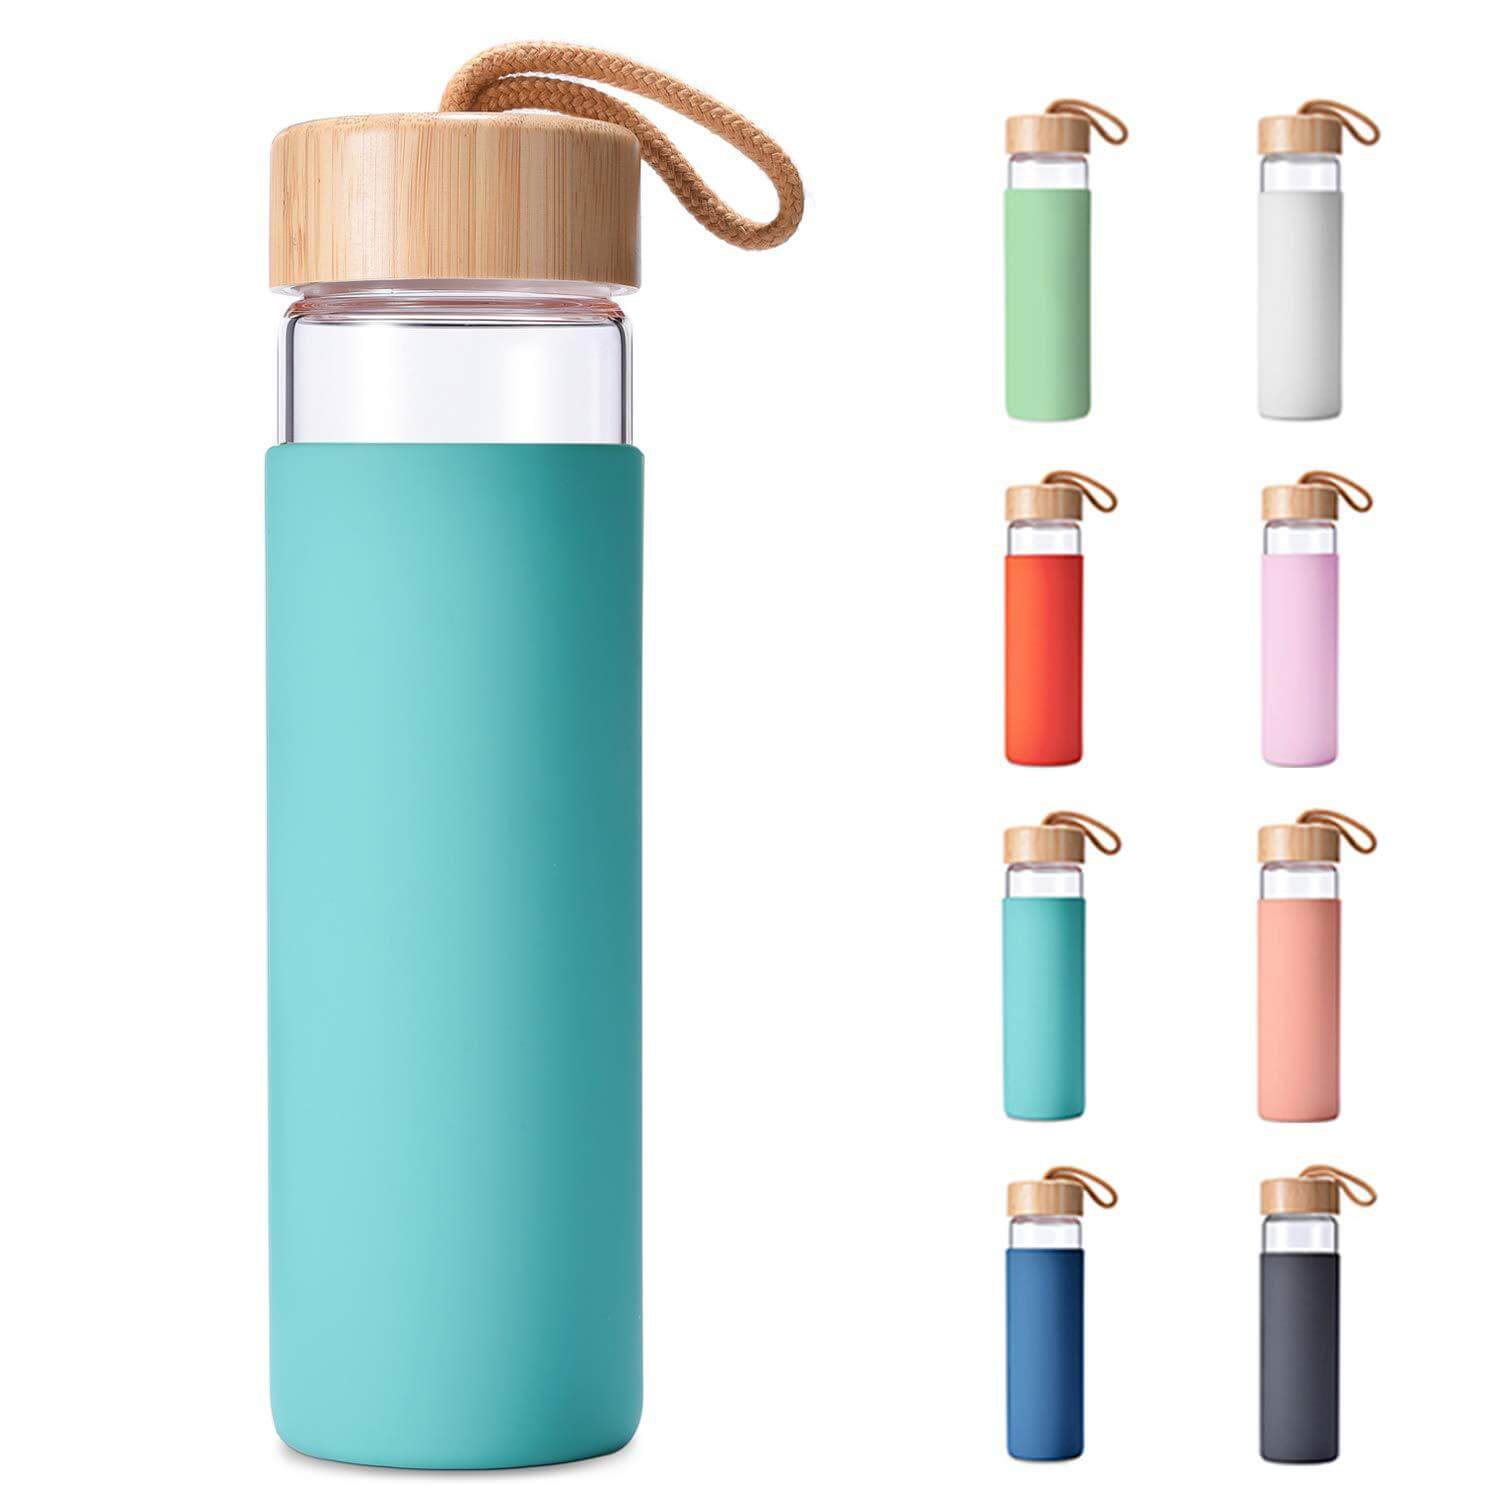 Technology at Your Service: The Smart Water Bottle Revolution